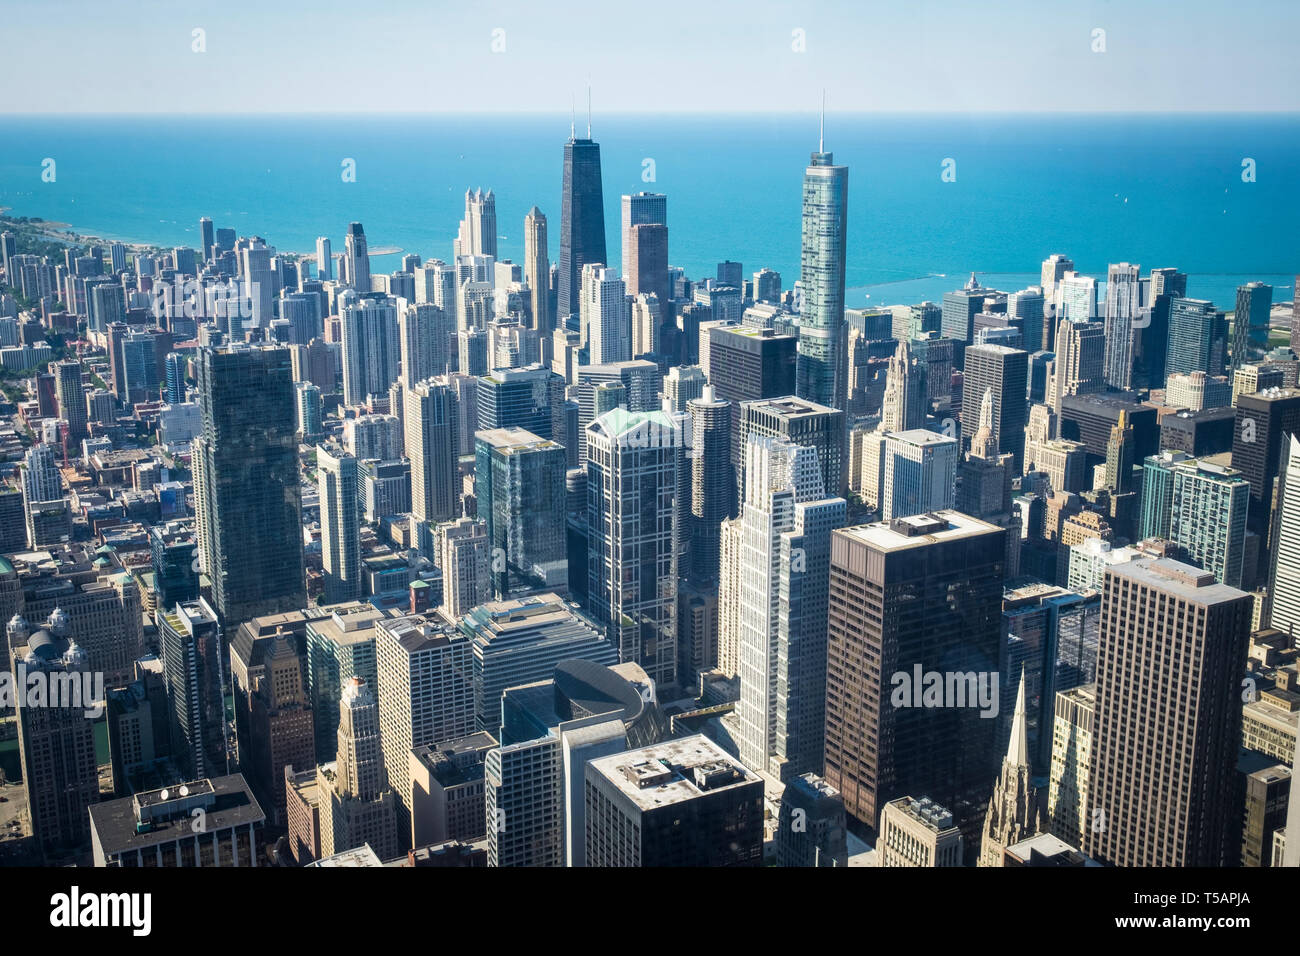 Outstanding bird eye view of Downtown Chicago from the Skydeck at iconic Willis Tower 103rd floor Stock Photo